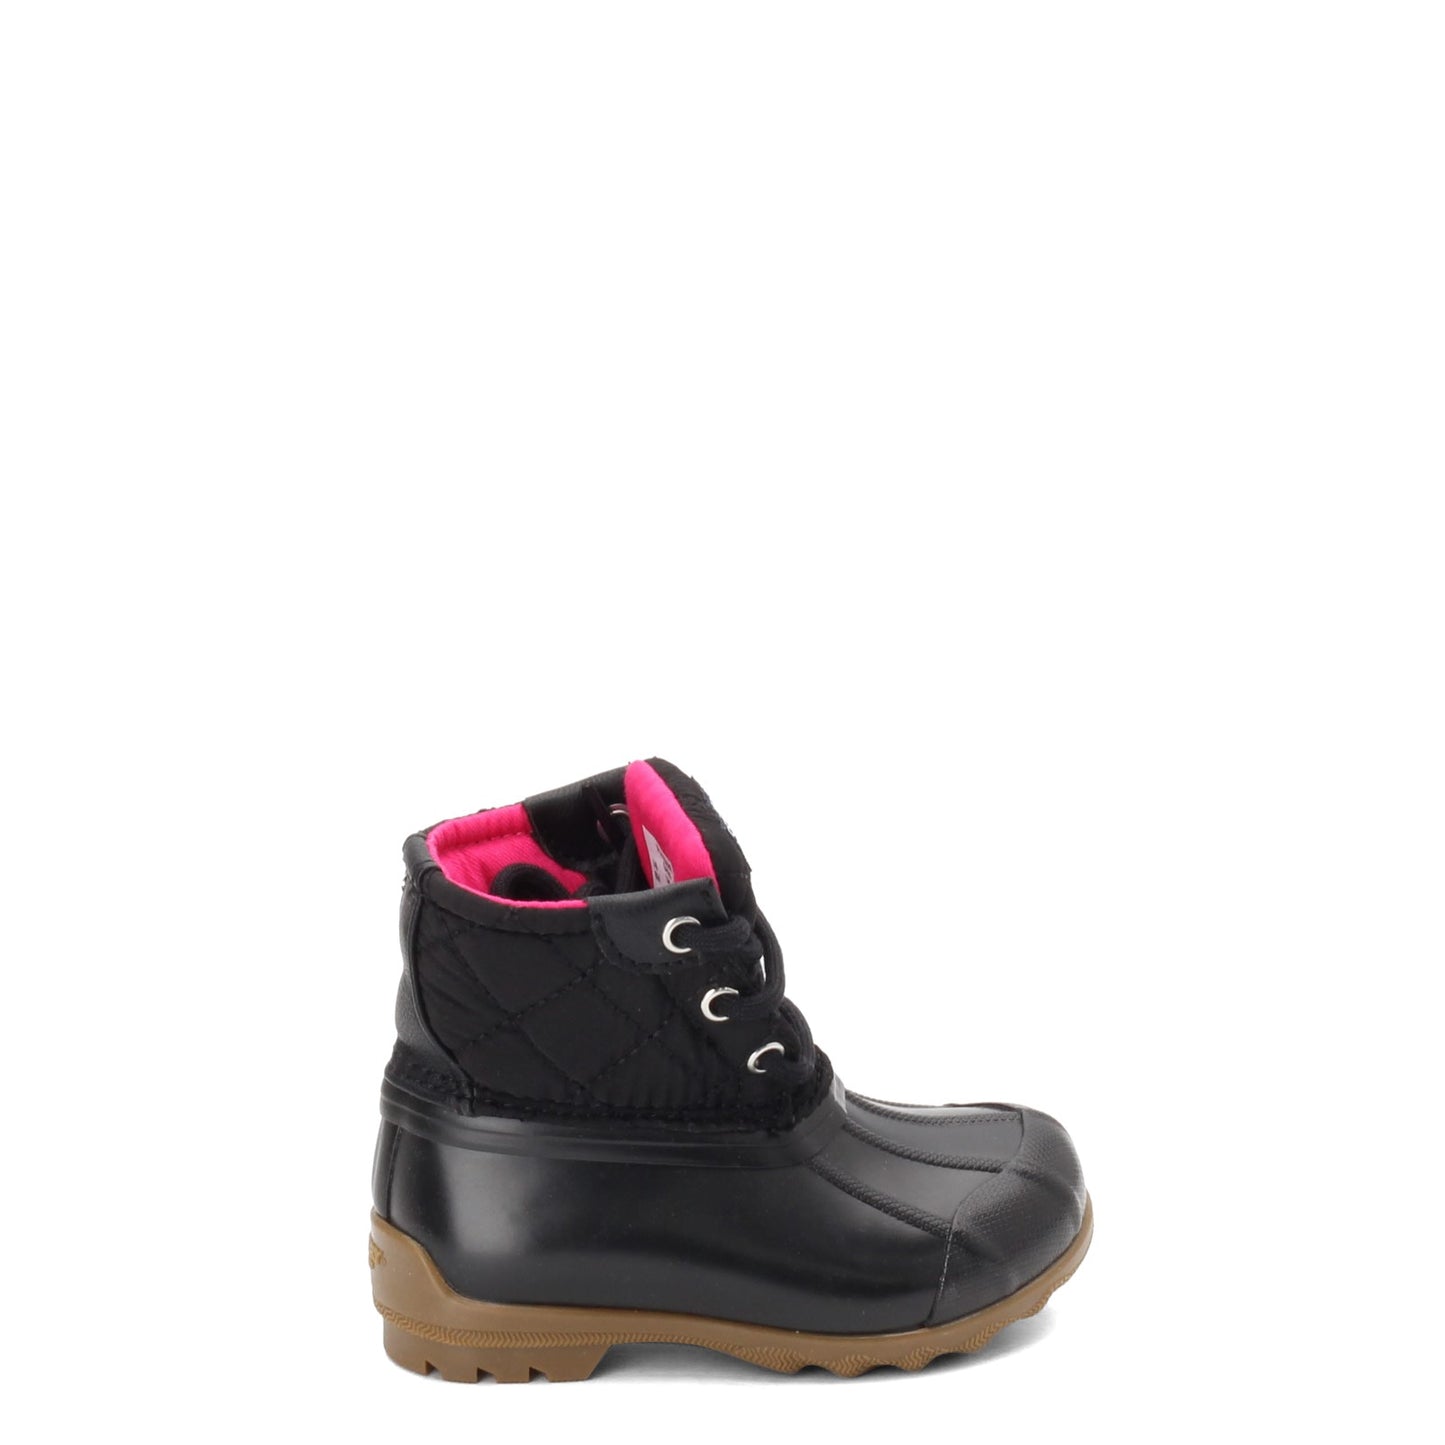 Peltz Shoes  Girl's Sperry Kids Port Boot - Toddler & Little Kid BLACK QUILTED SCL163758